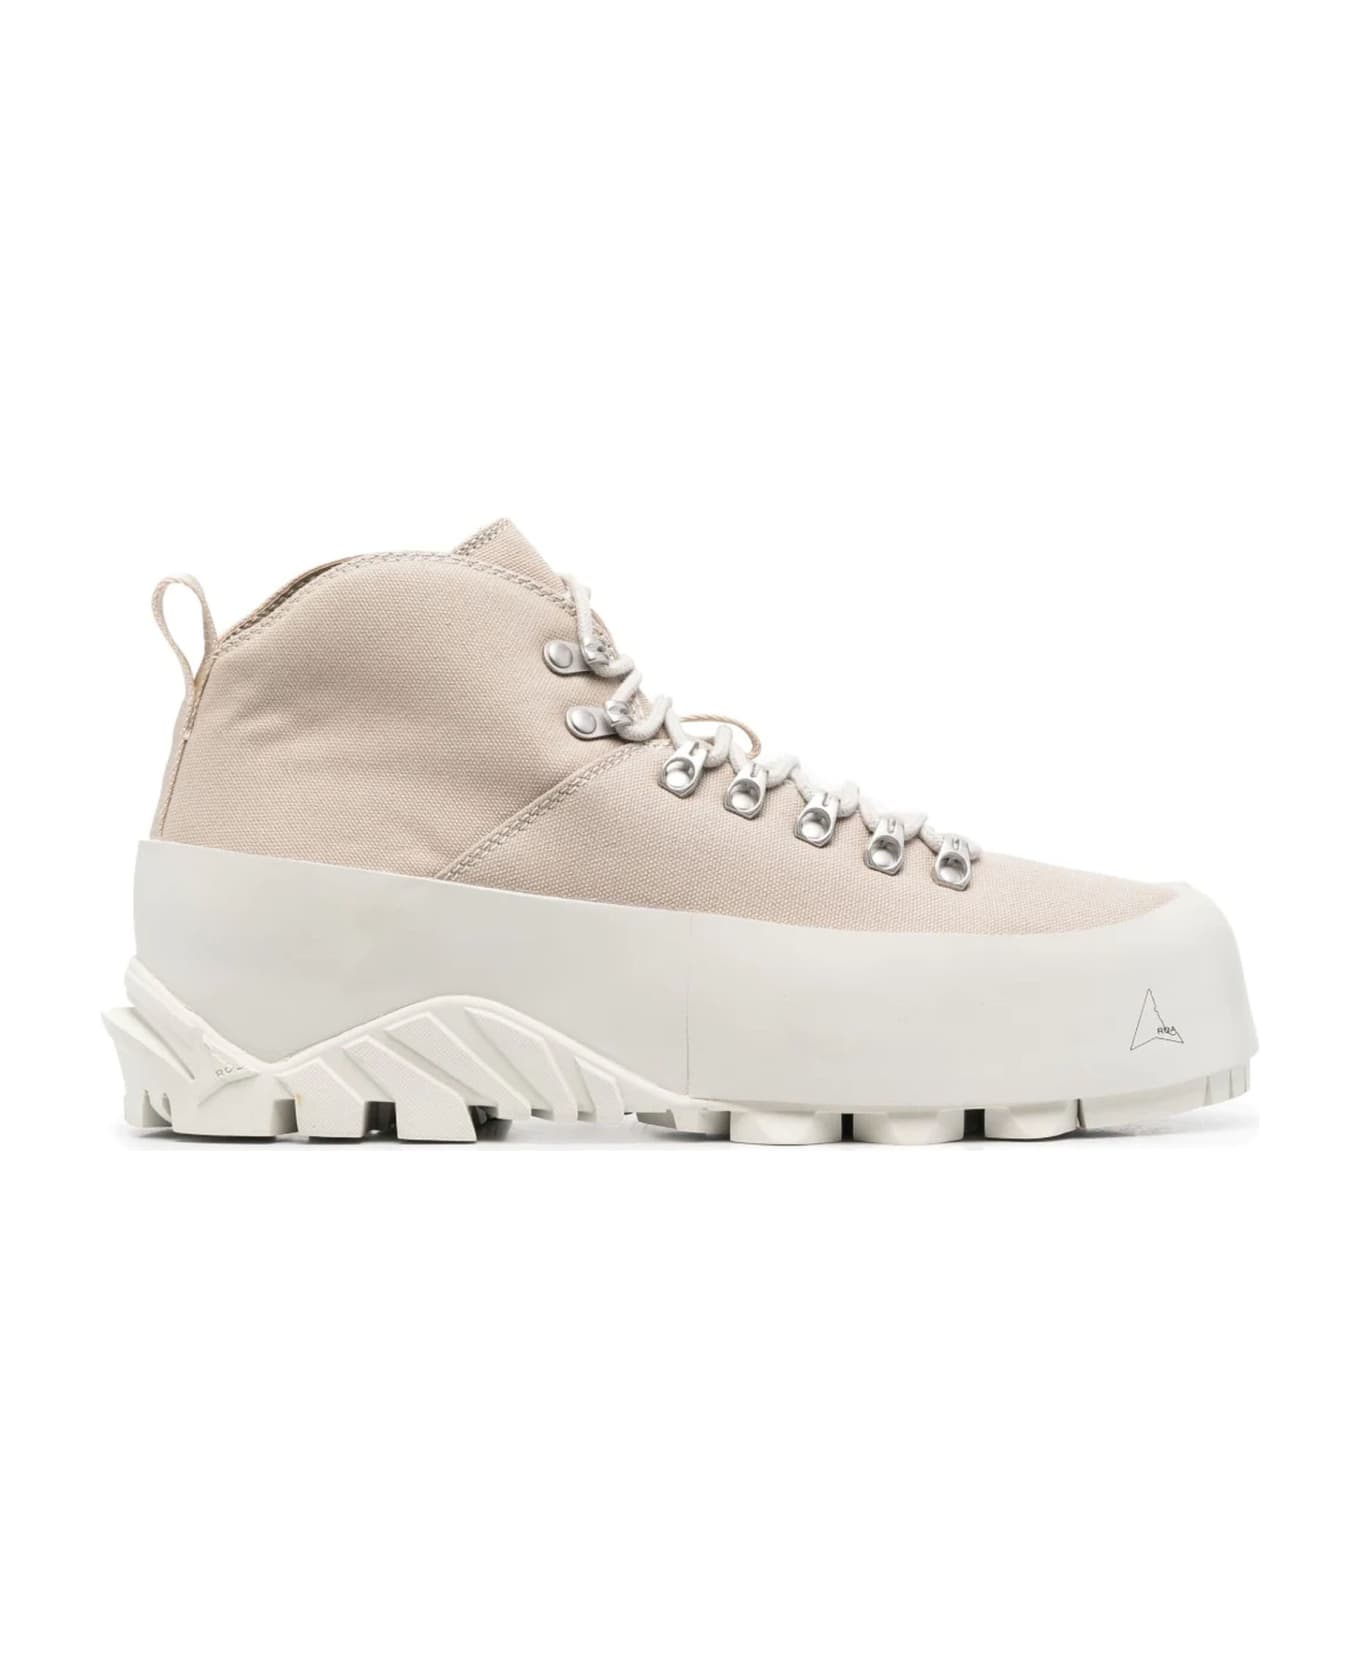 ROA Taupe Canvas Boots - Beige